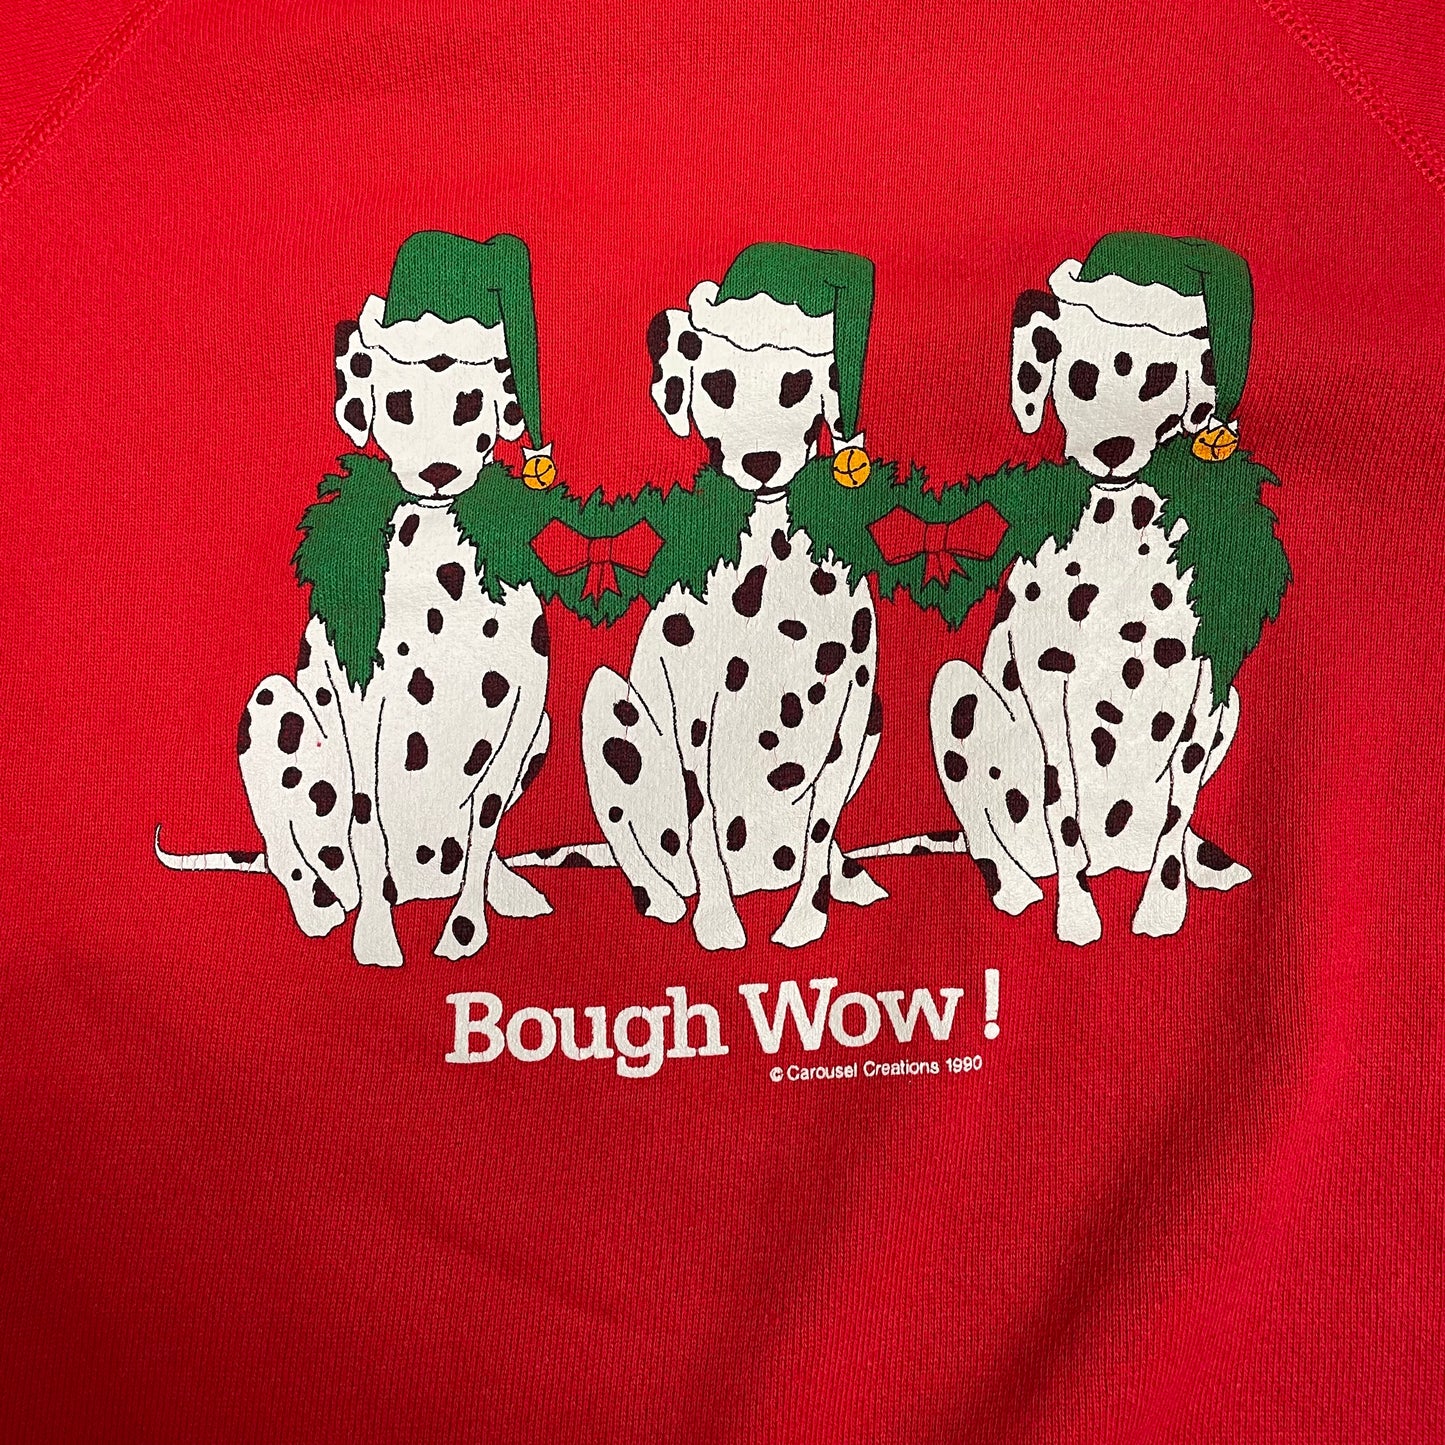 Vintage Sweater Hanes 1990 “Bough Wow!” Dalmatian Christmas Made in USA